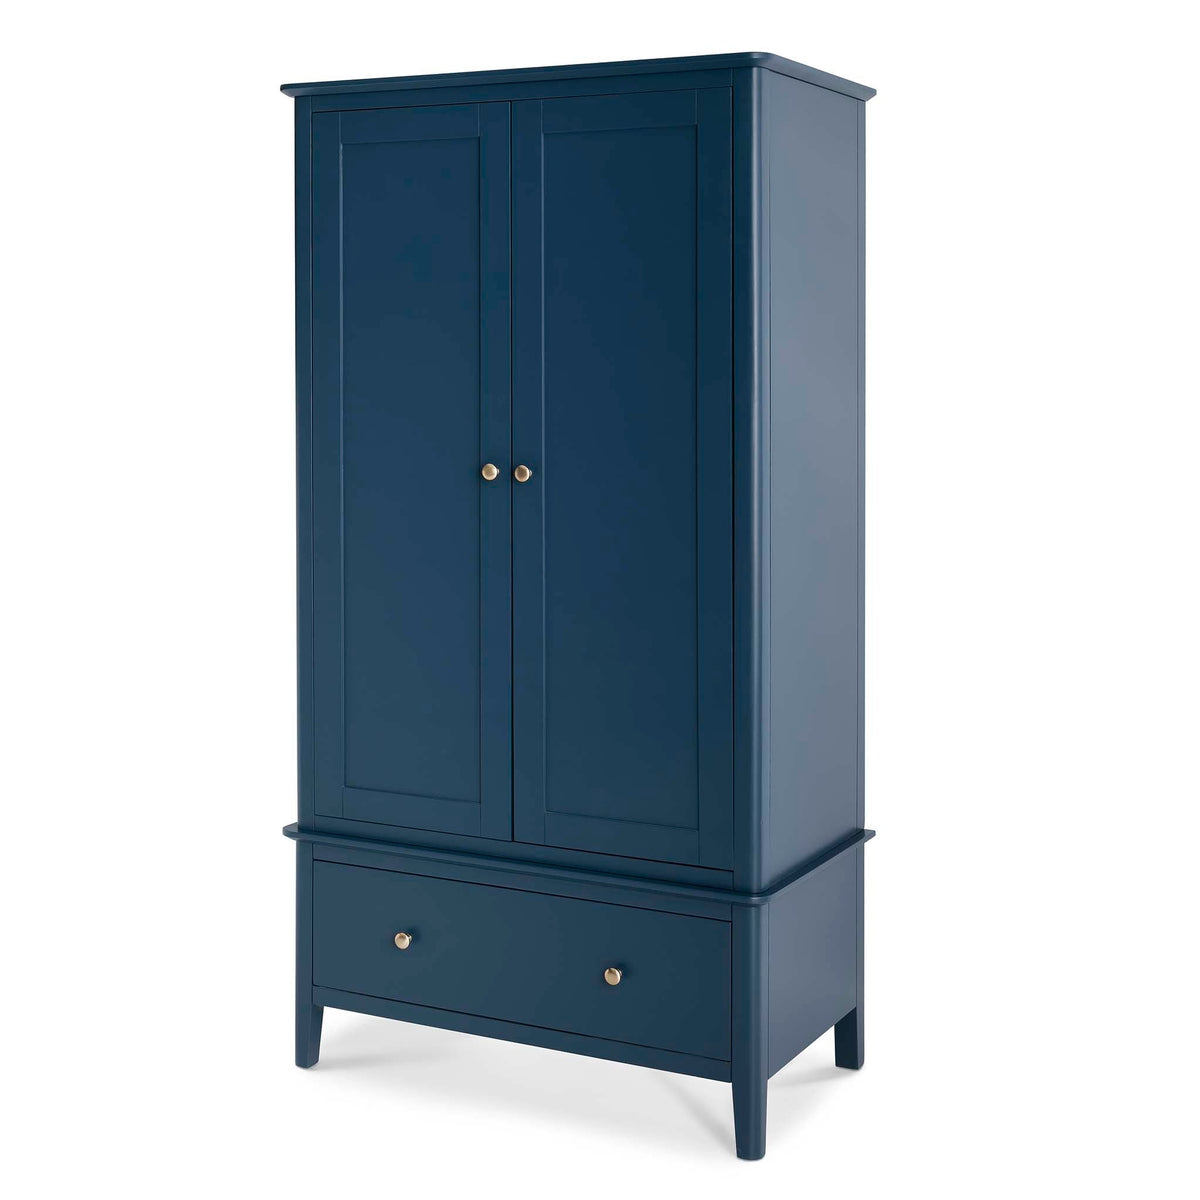 Stirling Blue Double Wardrobe - Side view